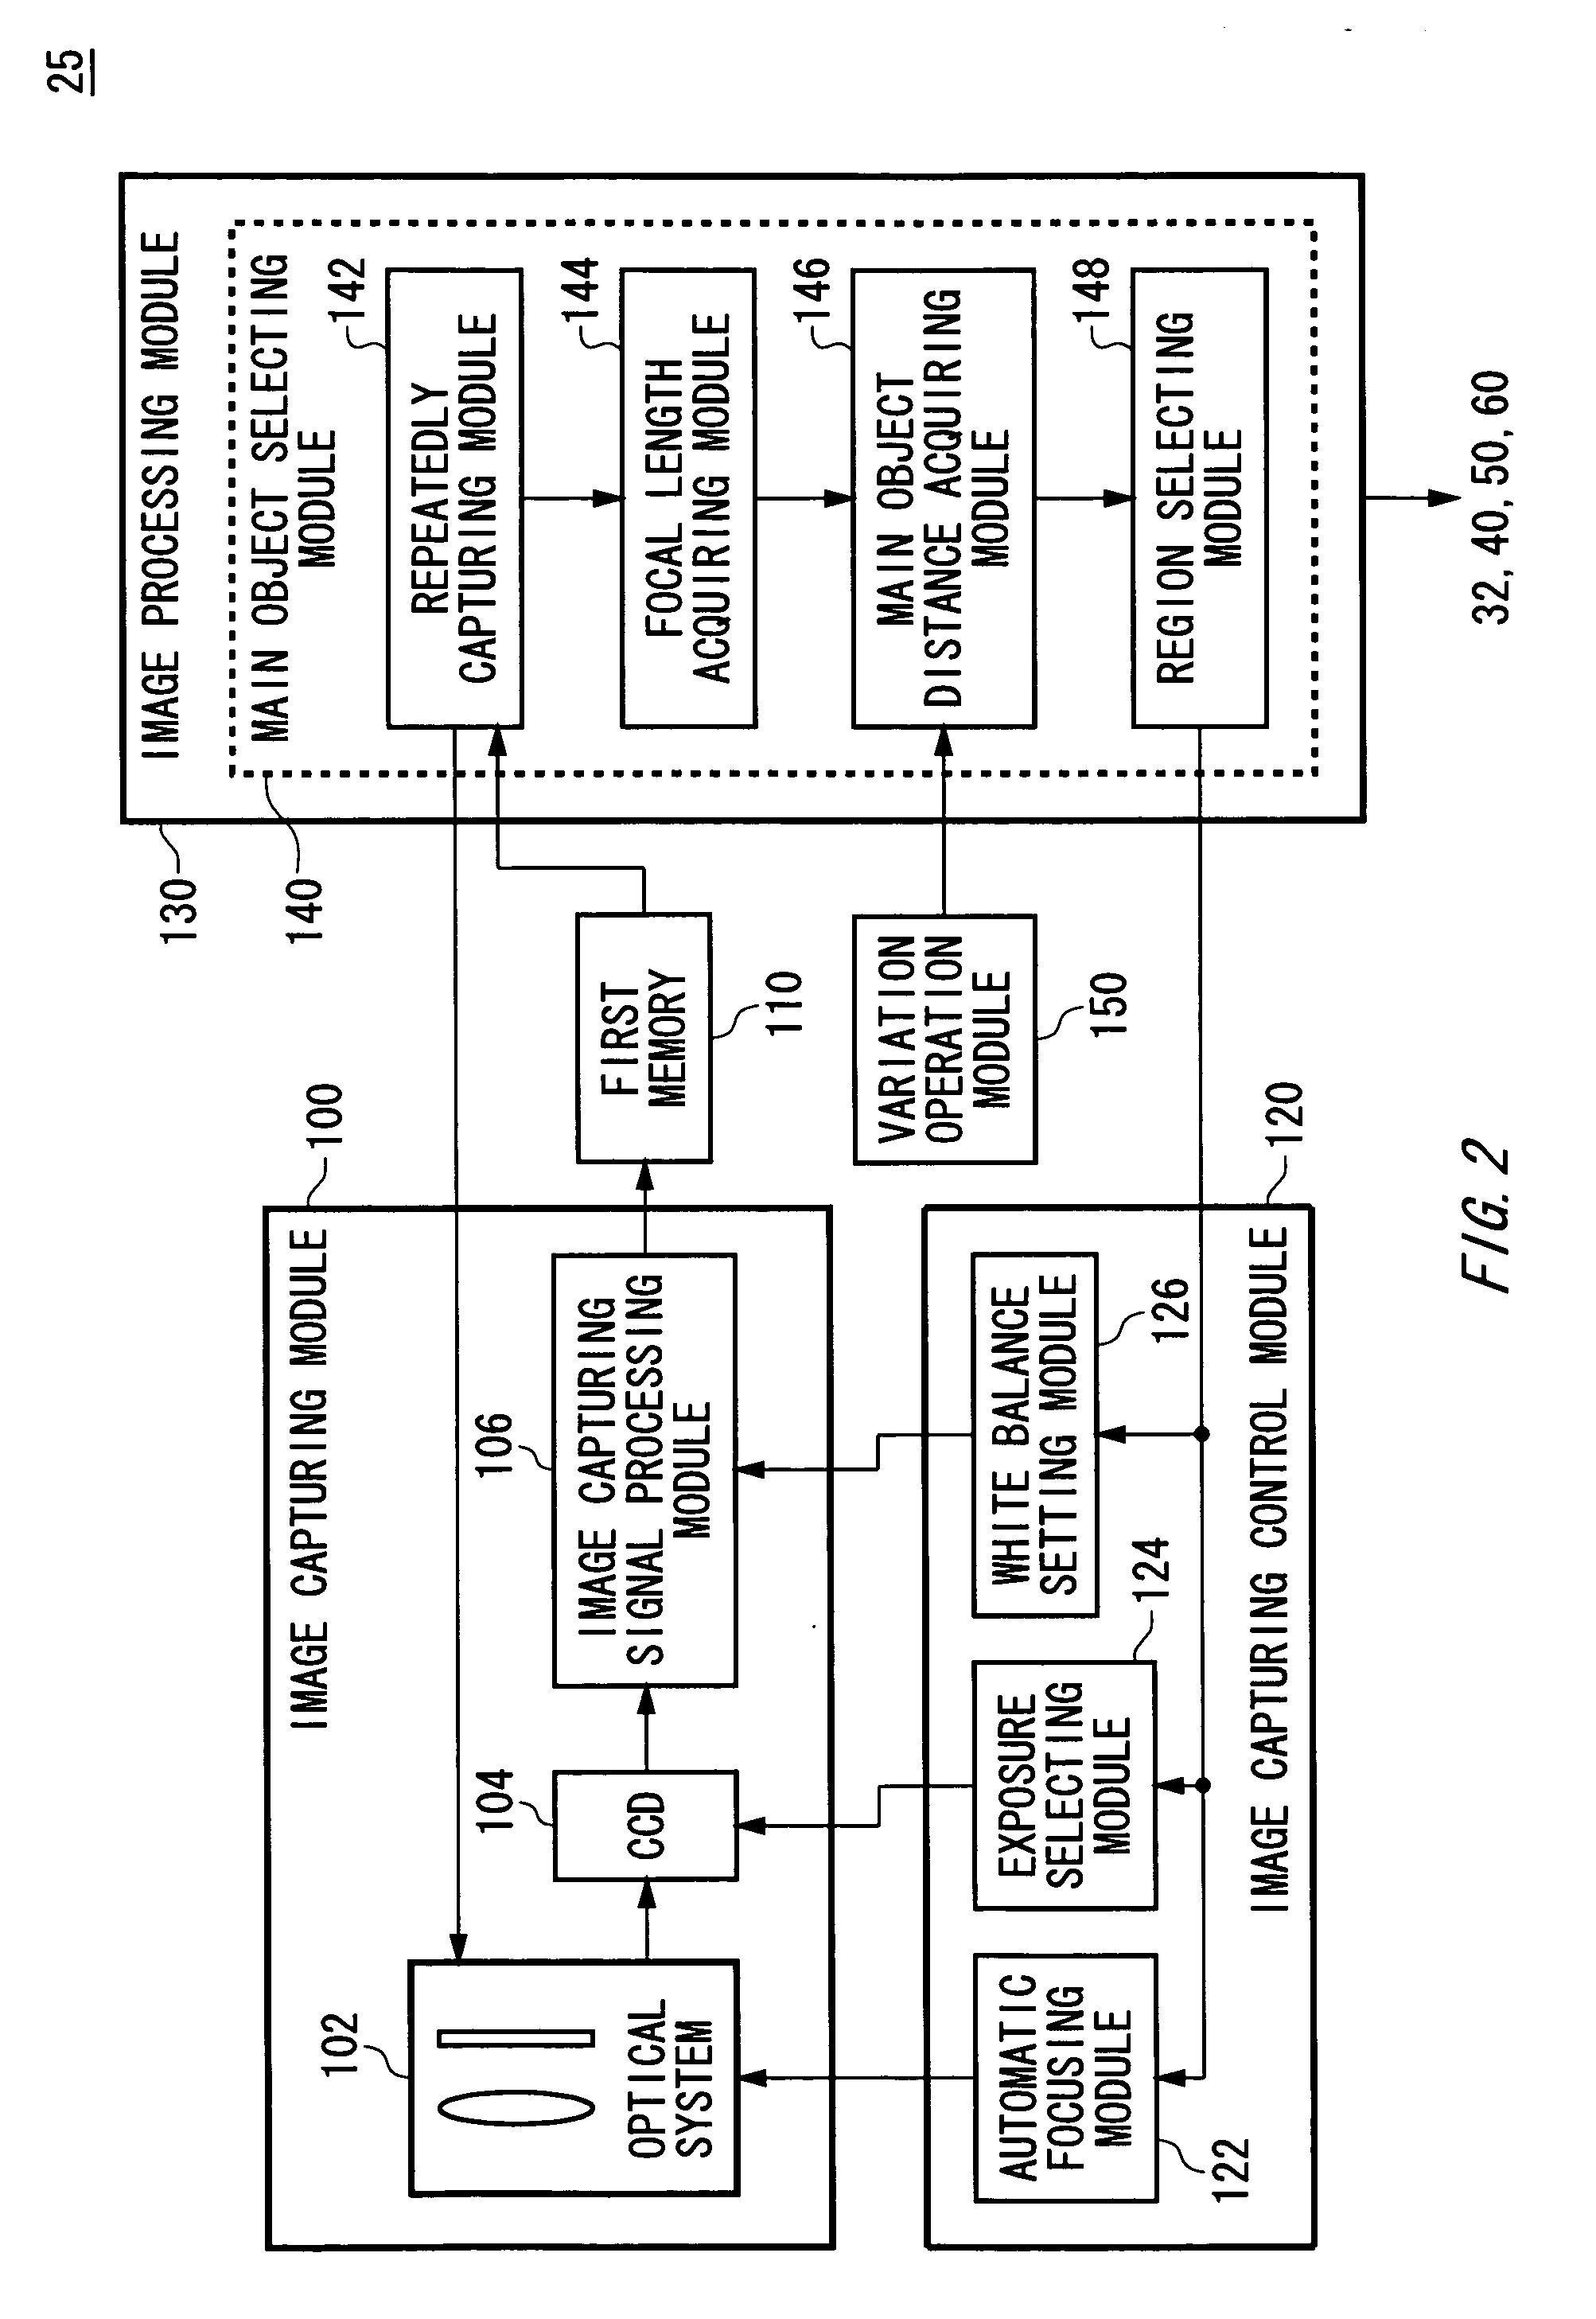 Digital pictorial book system, a pictorial book searching method, and a machine readable medium storing thereon a pictorial book searching program